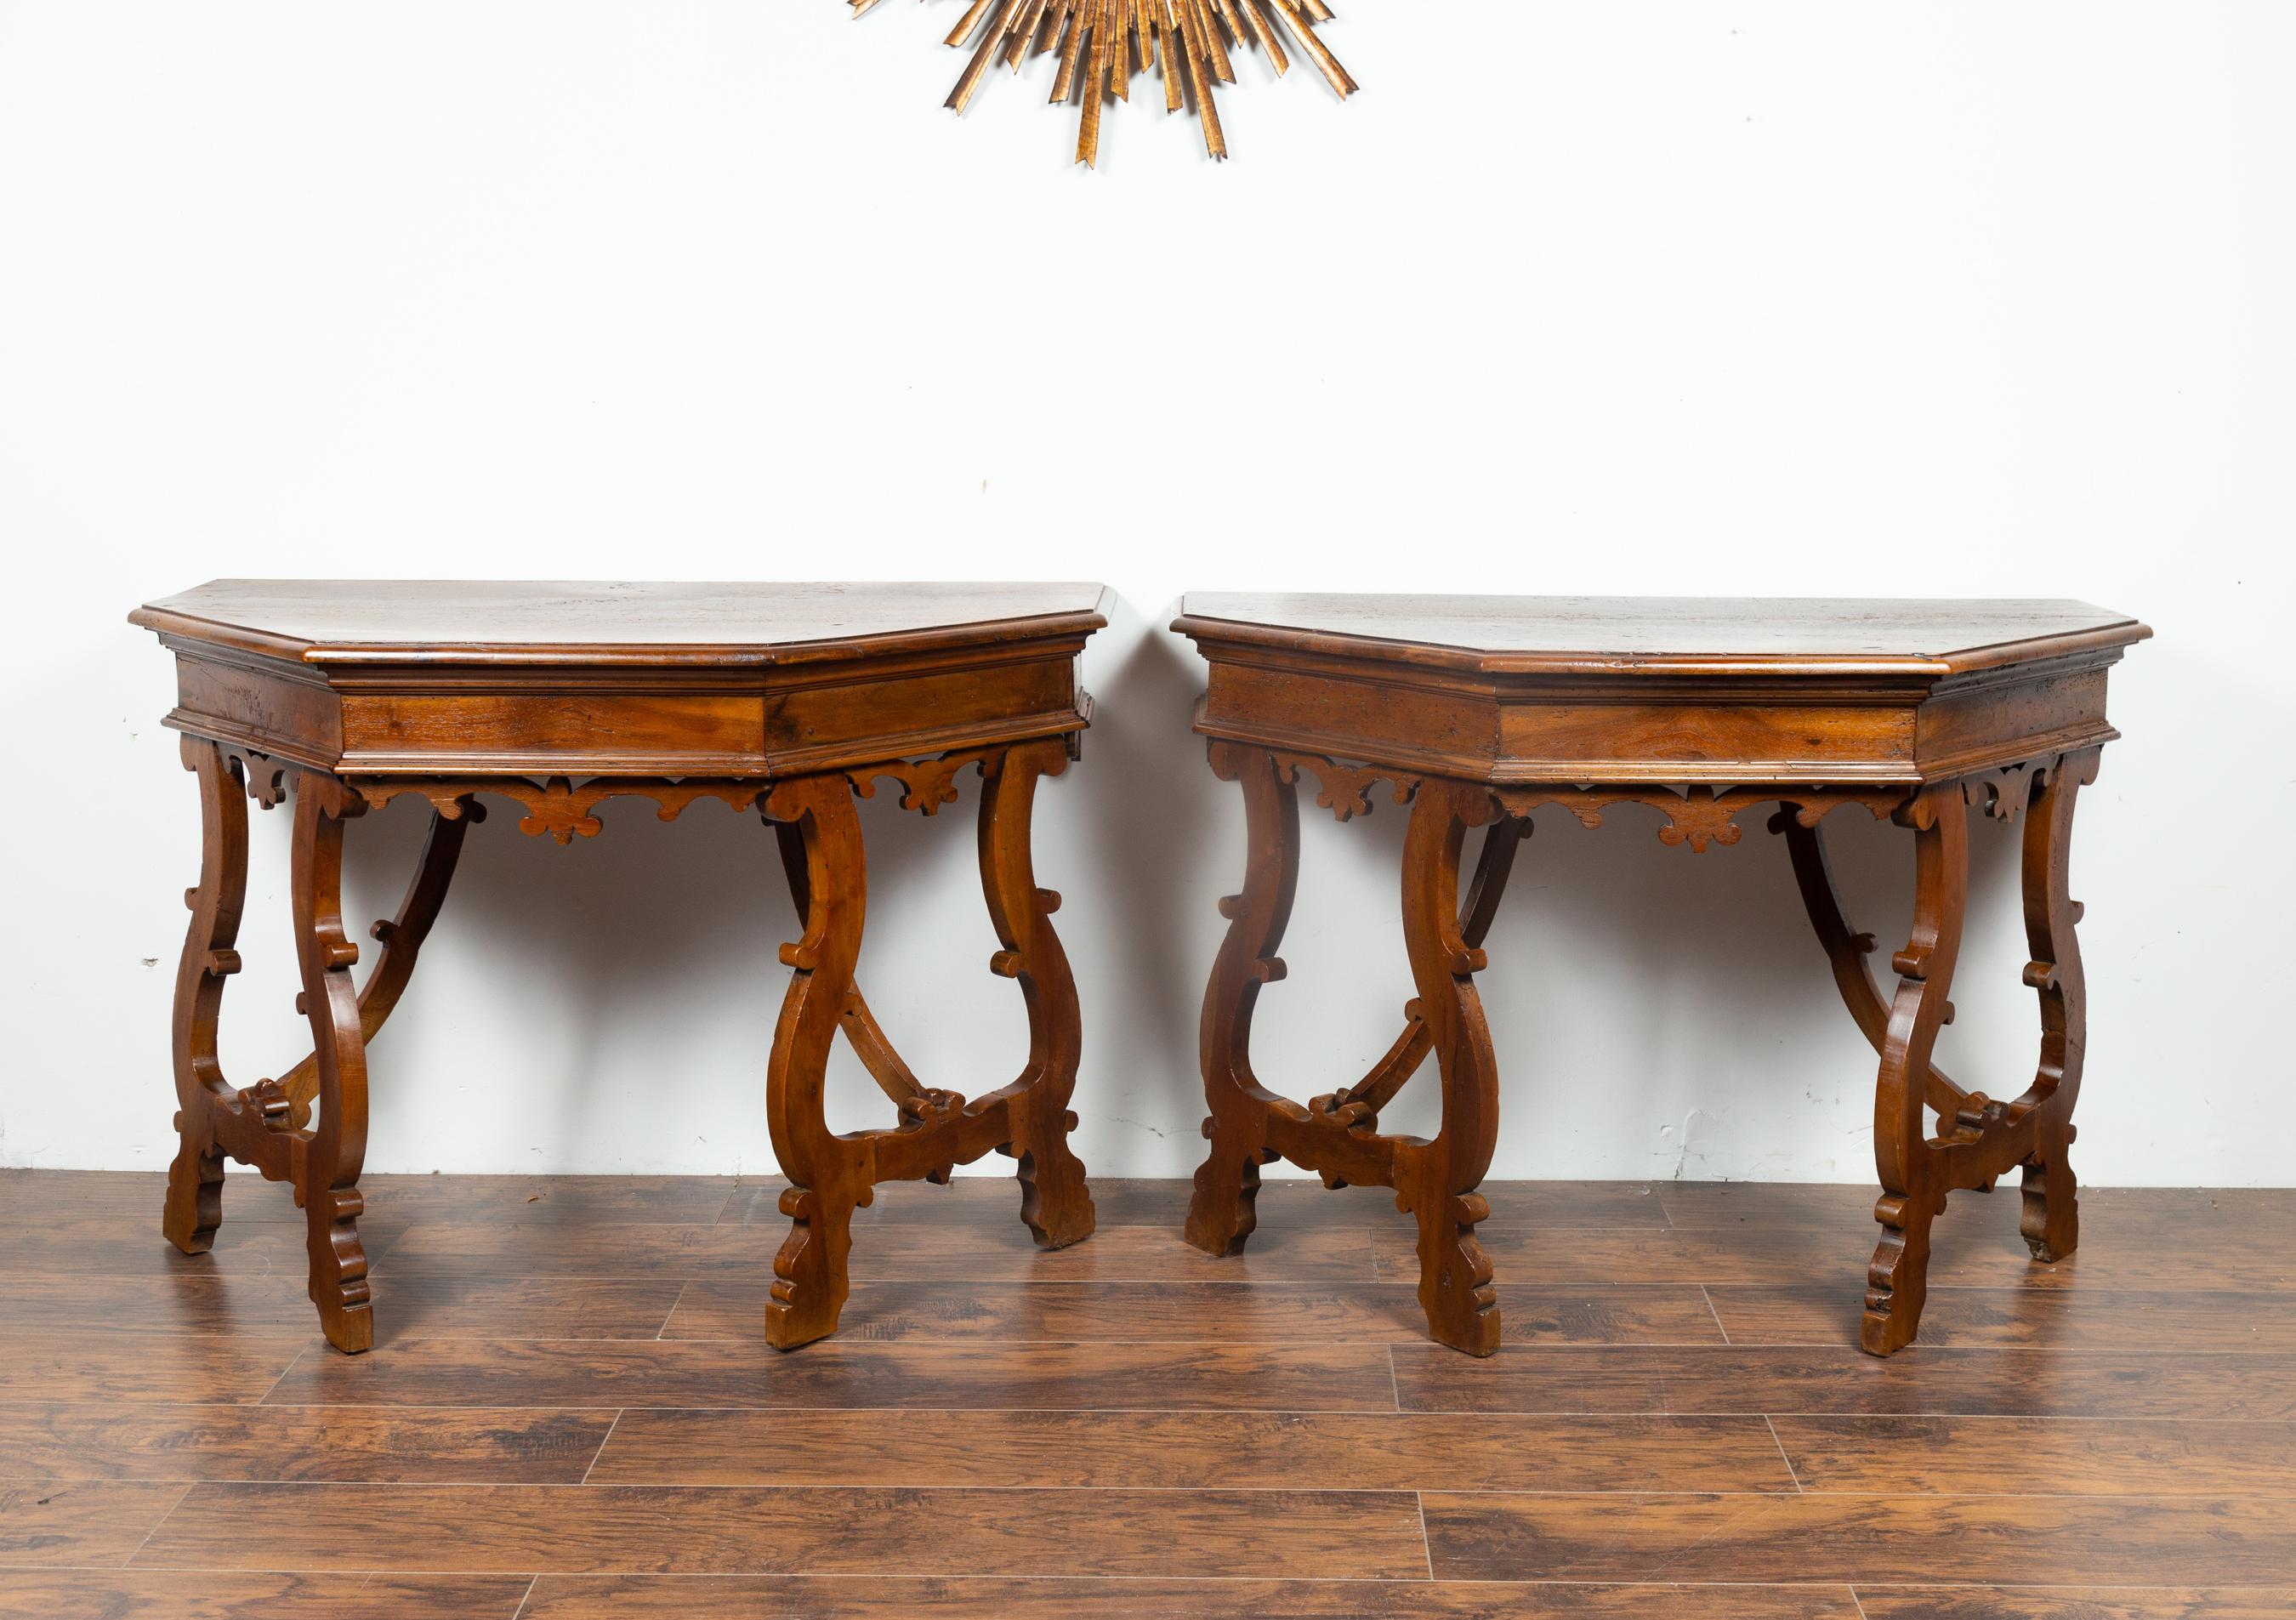 Baroque Pair of Italian mid 1800's Walnut Demi lune Tables with Lyre Shaped Legs